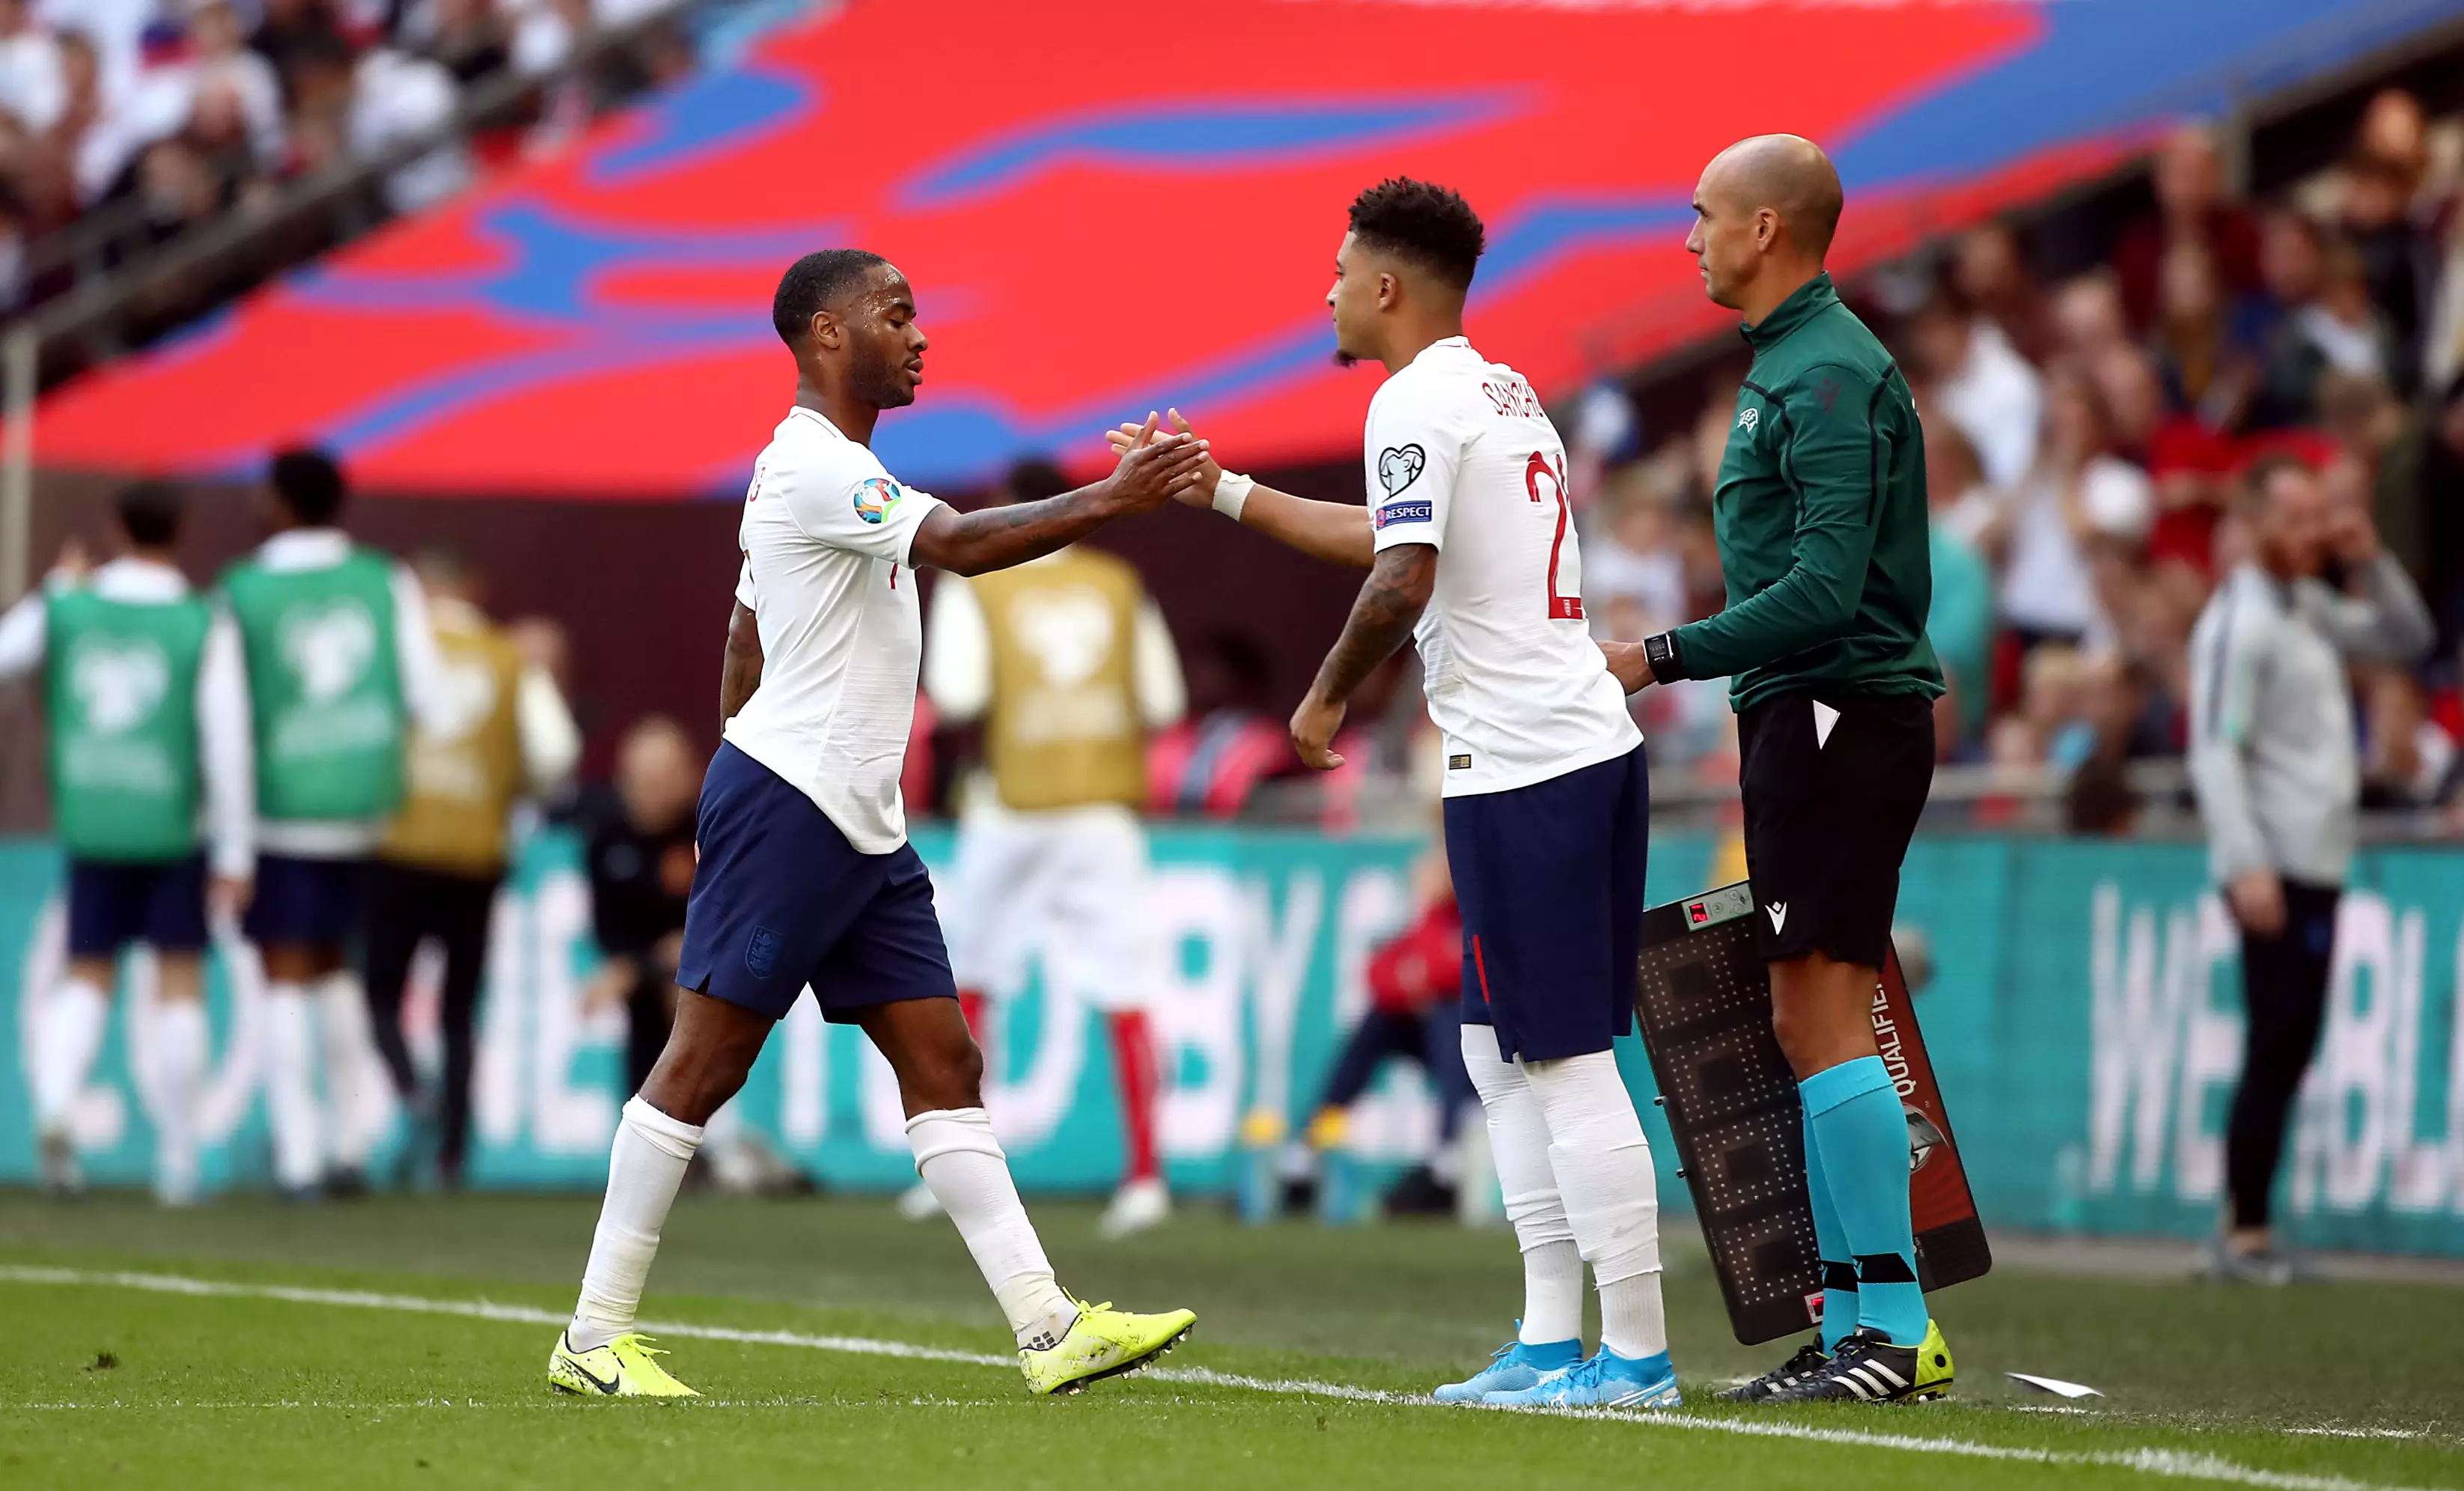 Jadon Sancho revealed Raheem Sterling quit when they played at FIFA